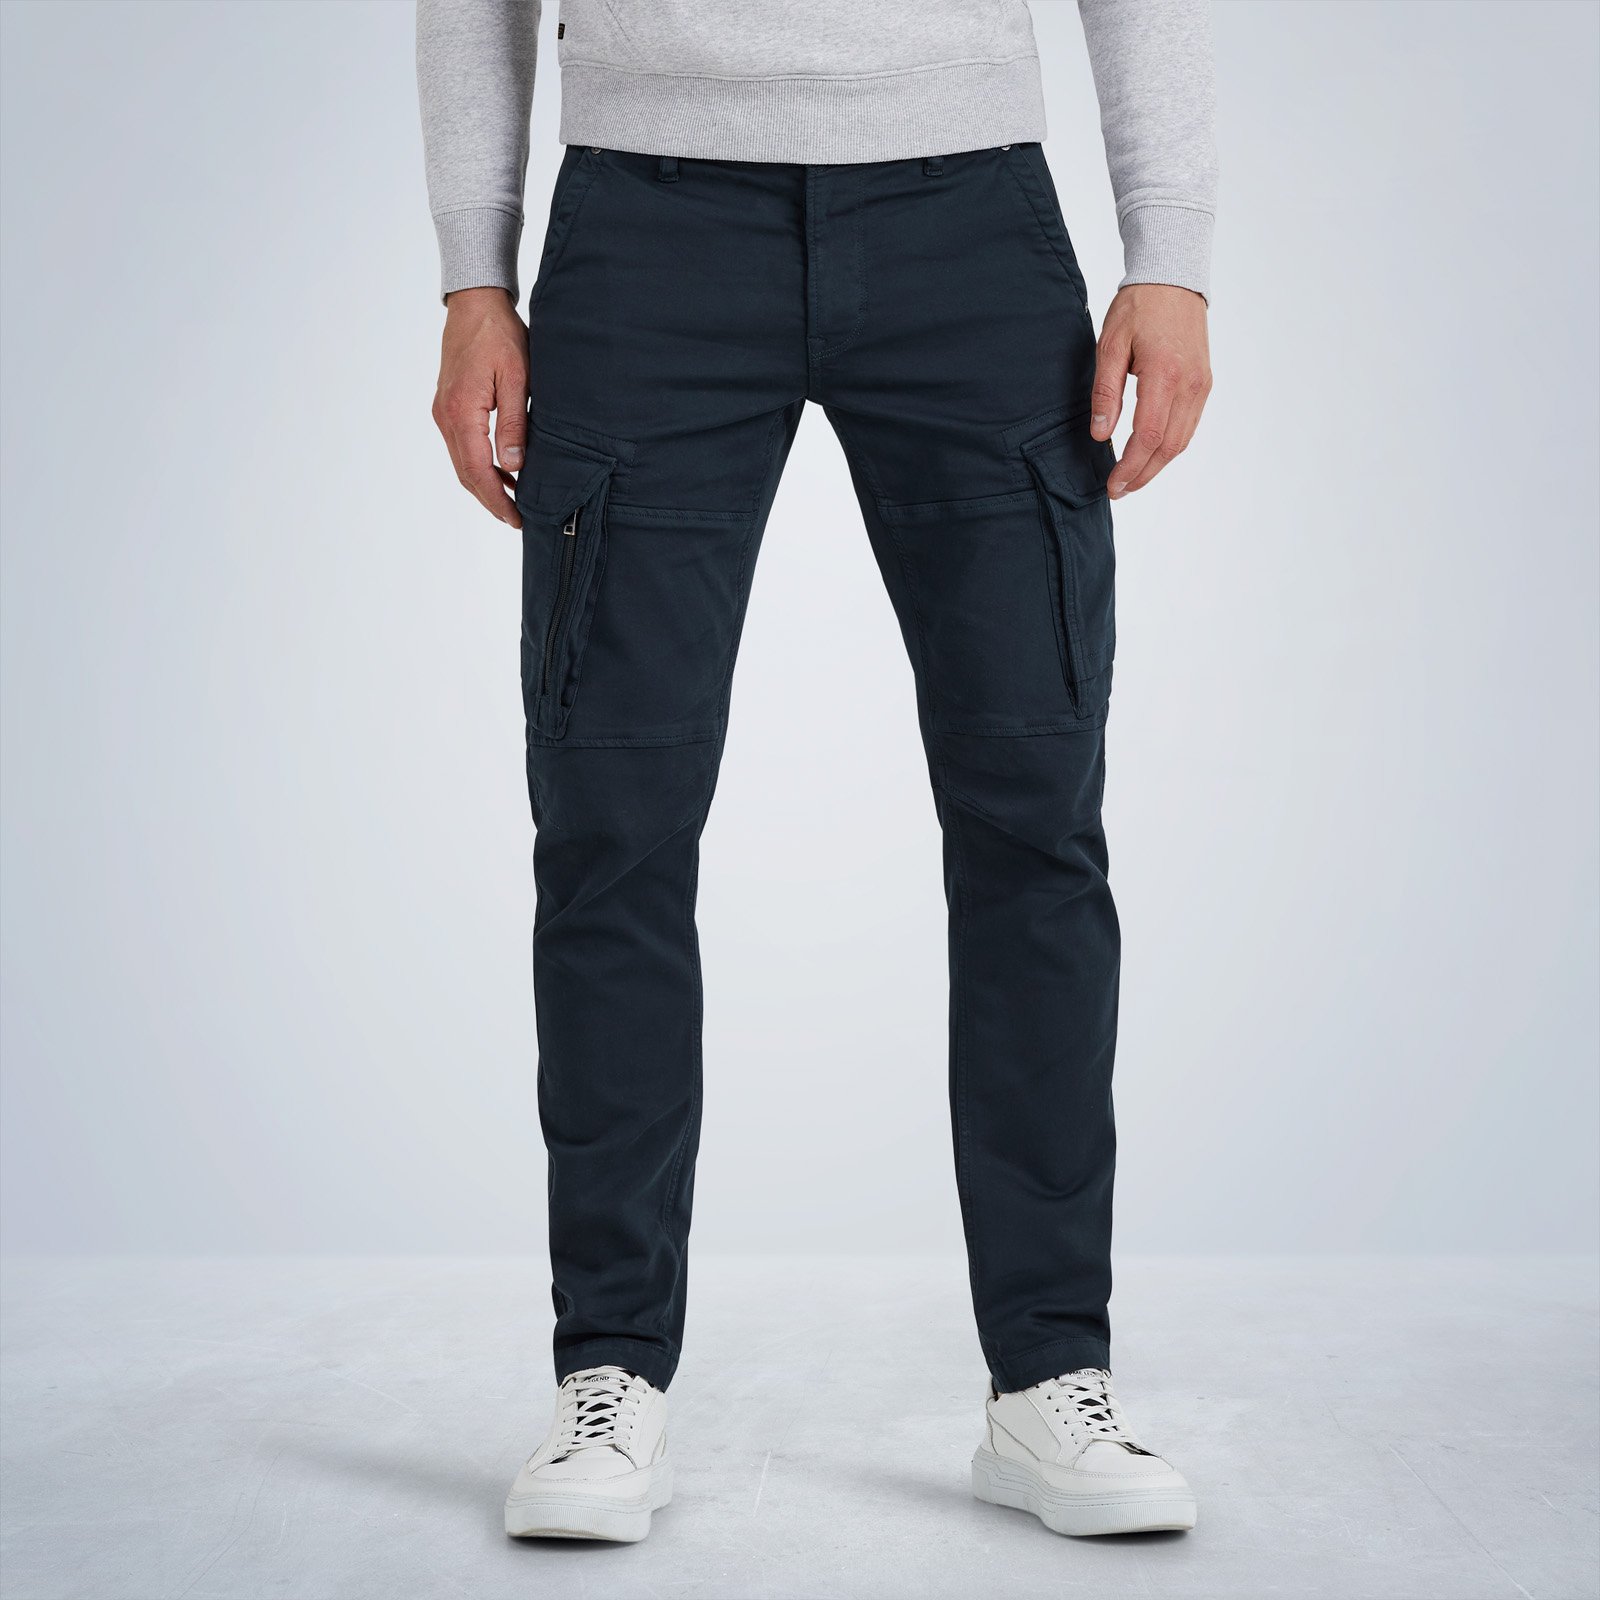 fit and Free shipping | pants returns cargo Expedizor PME relaxed LEGEND |